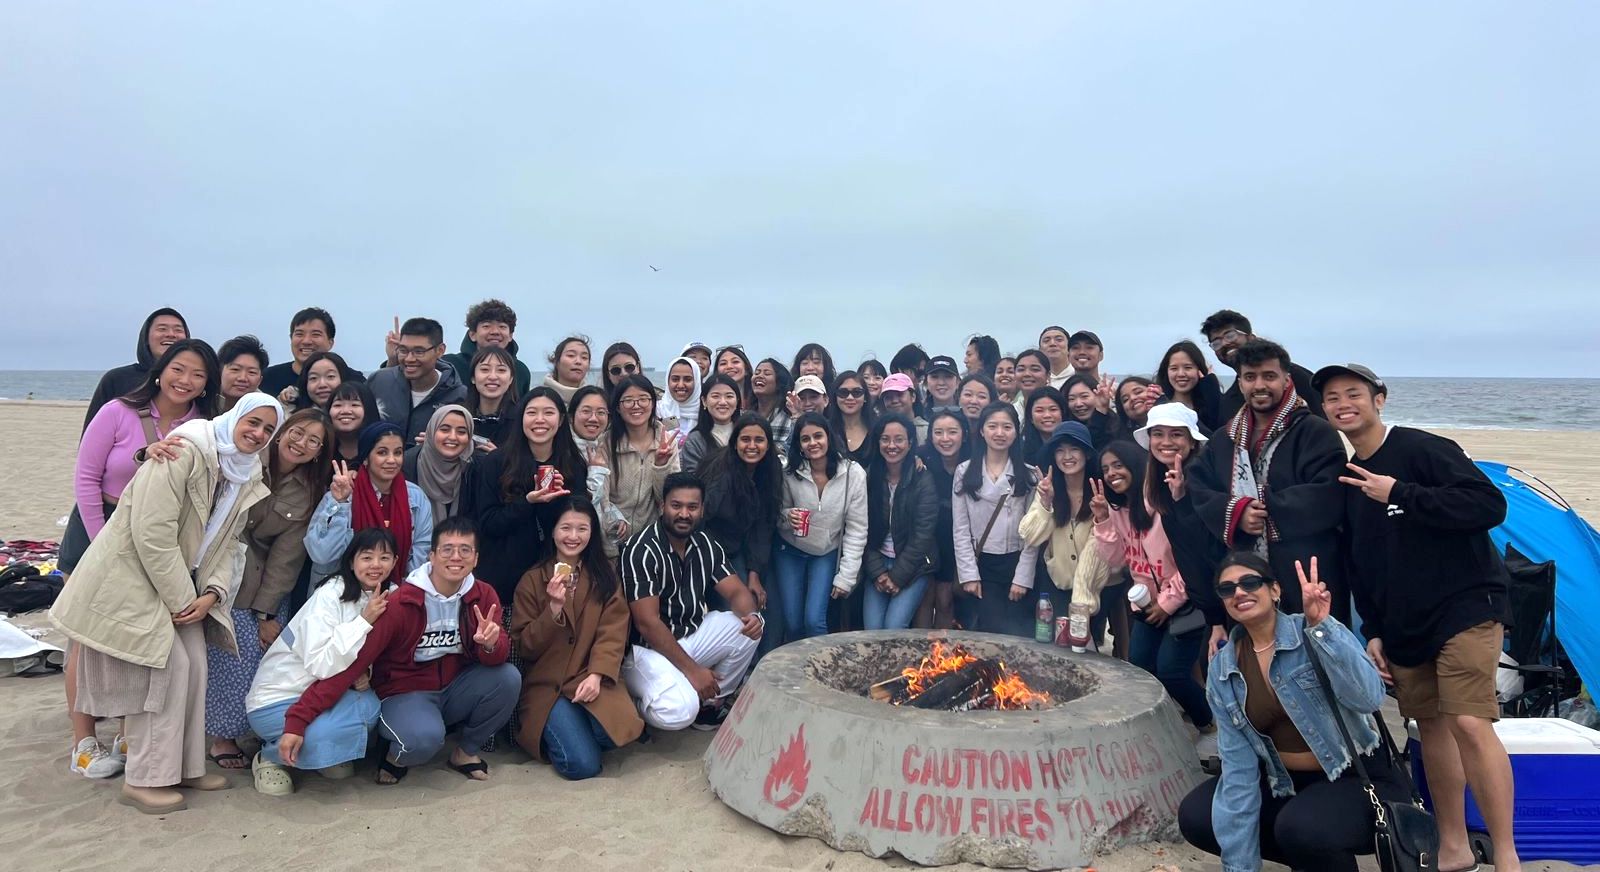 Picture of the Last Class BBQ Bonding in Dockweiler beach organized by Global Initiatives!